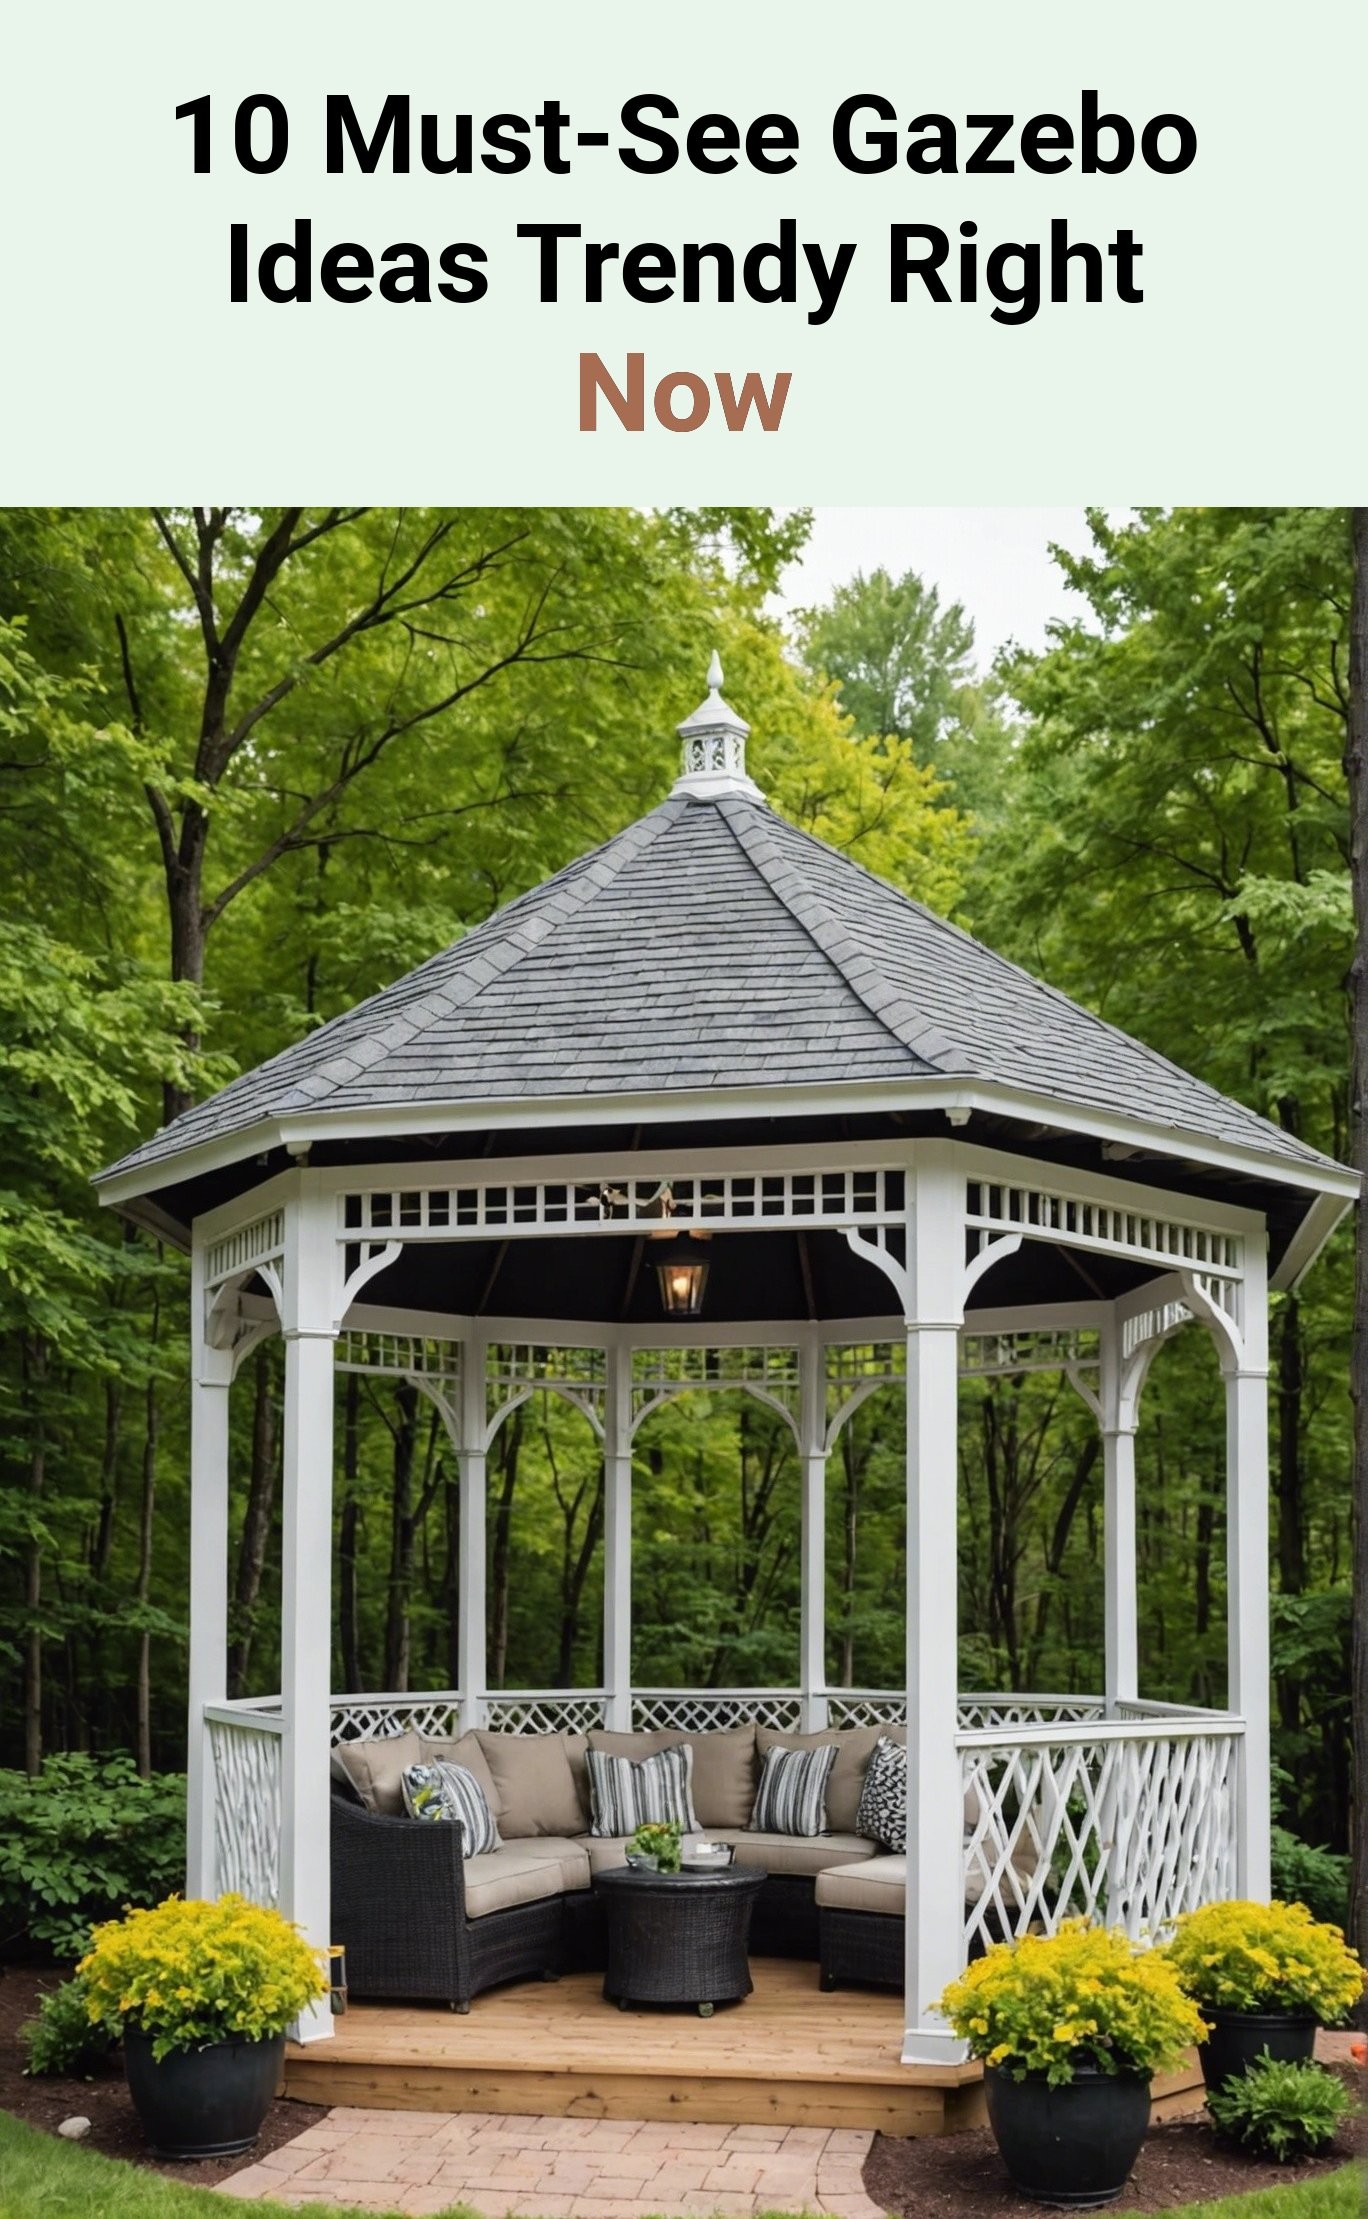 10 Must-See Gazebo Ideas Trendy Right Now